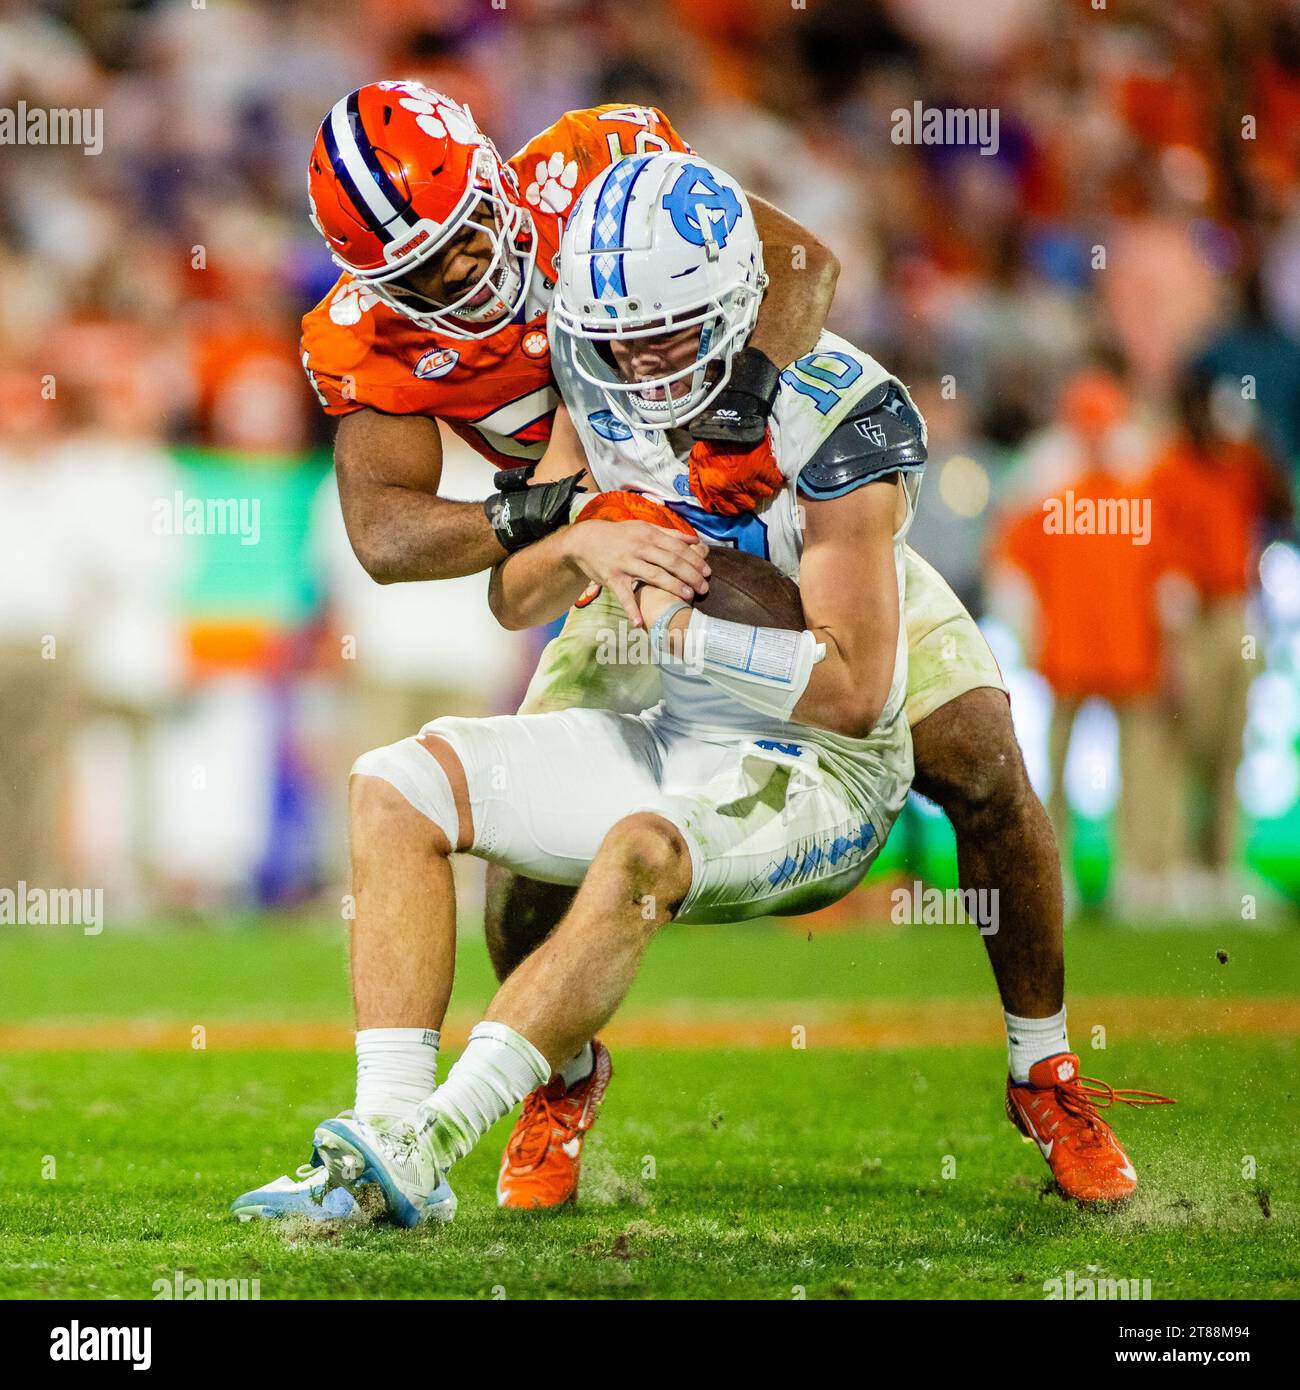 November 18, 2023: Clemson Tigers linebacker Jeremiah Trotter Jr. (54) tackles Clemson Tigers wide receiver Troy Stellato (10) during the second half of the ACC Football matchup at Memorial Stadium in Clemson, SC. (Scott Kinser/CSM) Stock Photo